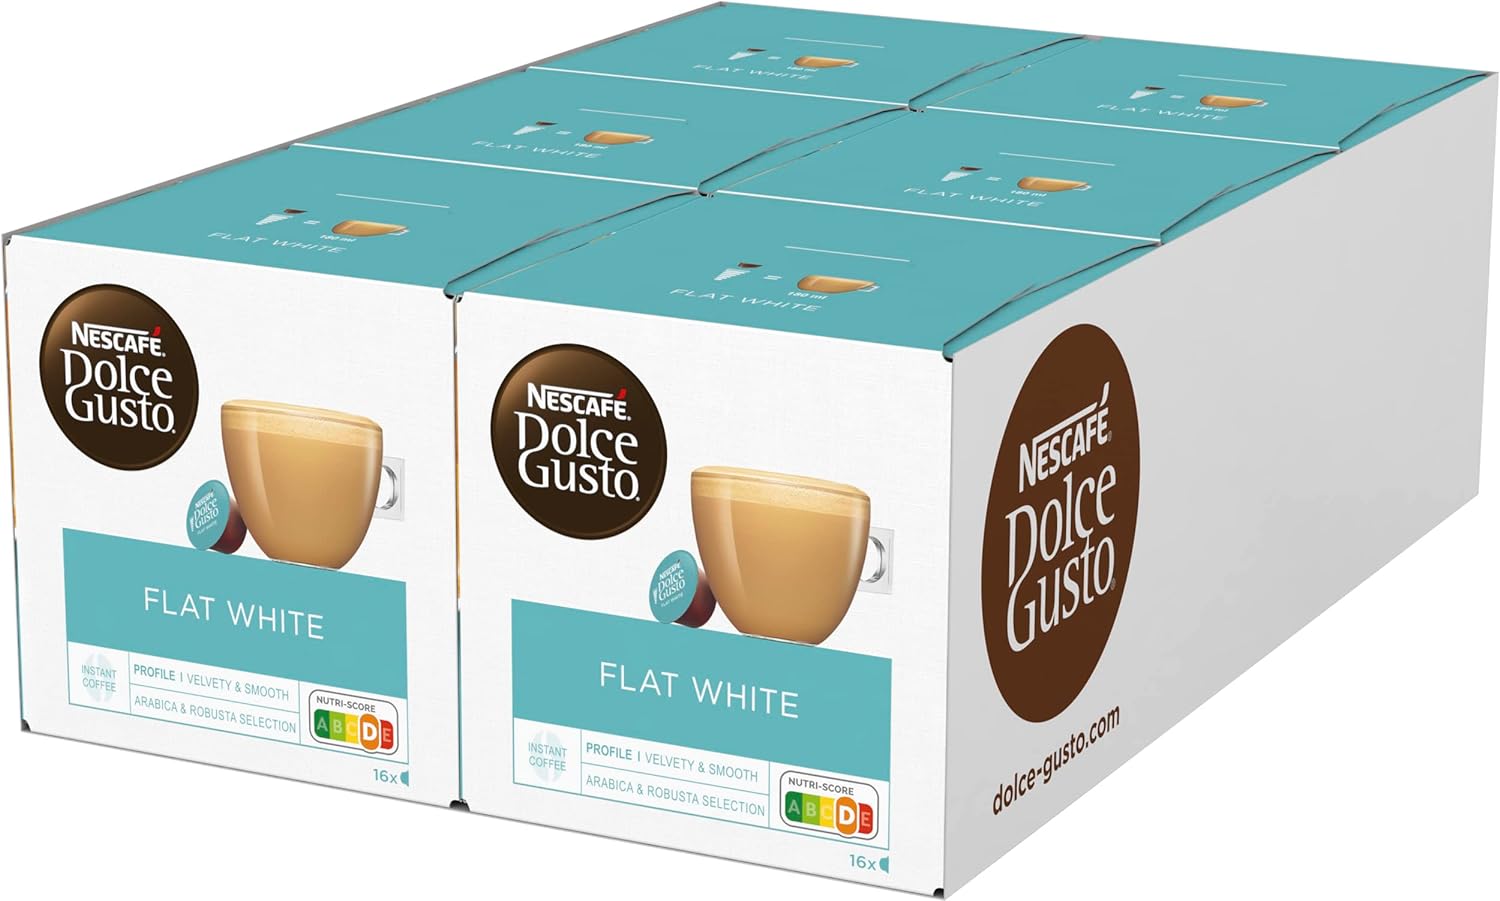 NESCAFÉ Dolce Gusto Flat White, 96 Coffee Capsules, Arabica and Robusta Beans, Creamy Milky Enjoyment, Coffee Creation, Coffee Shop Trend, Aroma Sealed Capsules, Pack of 6 (6 x 16 Capsules)